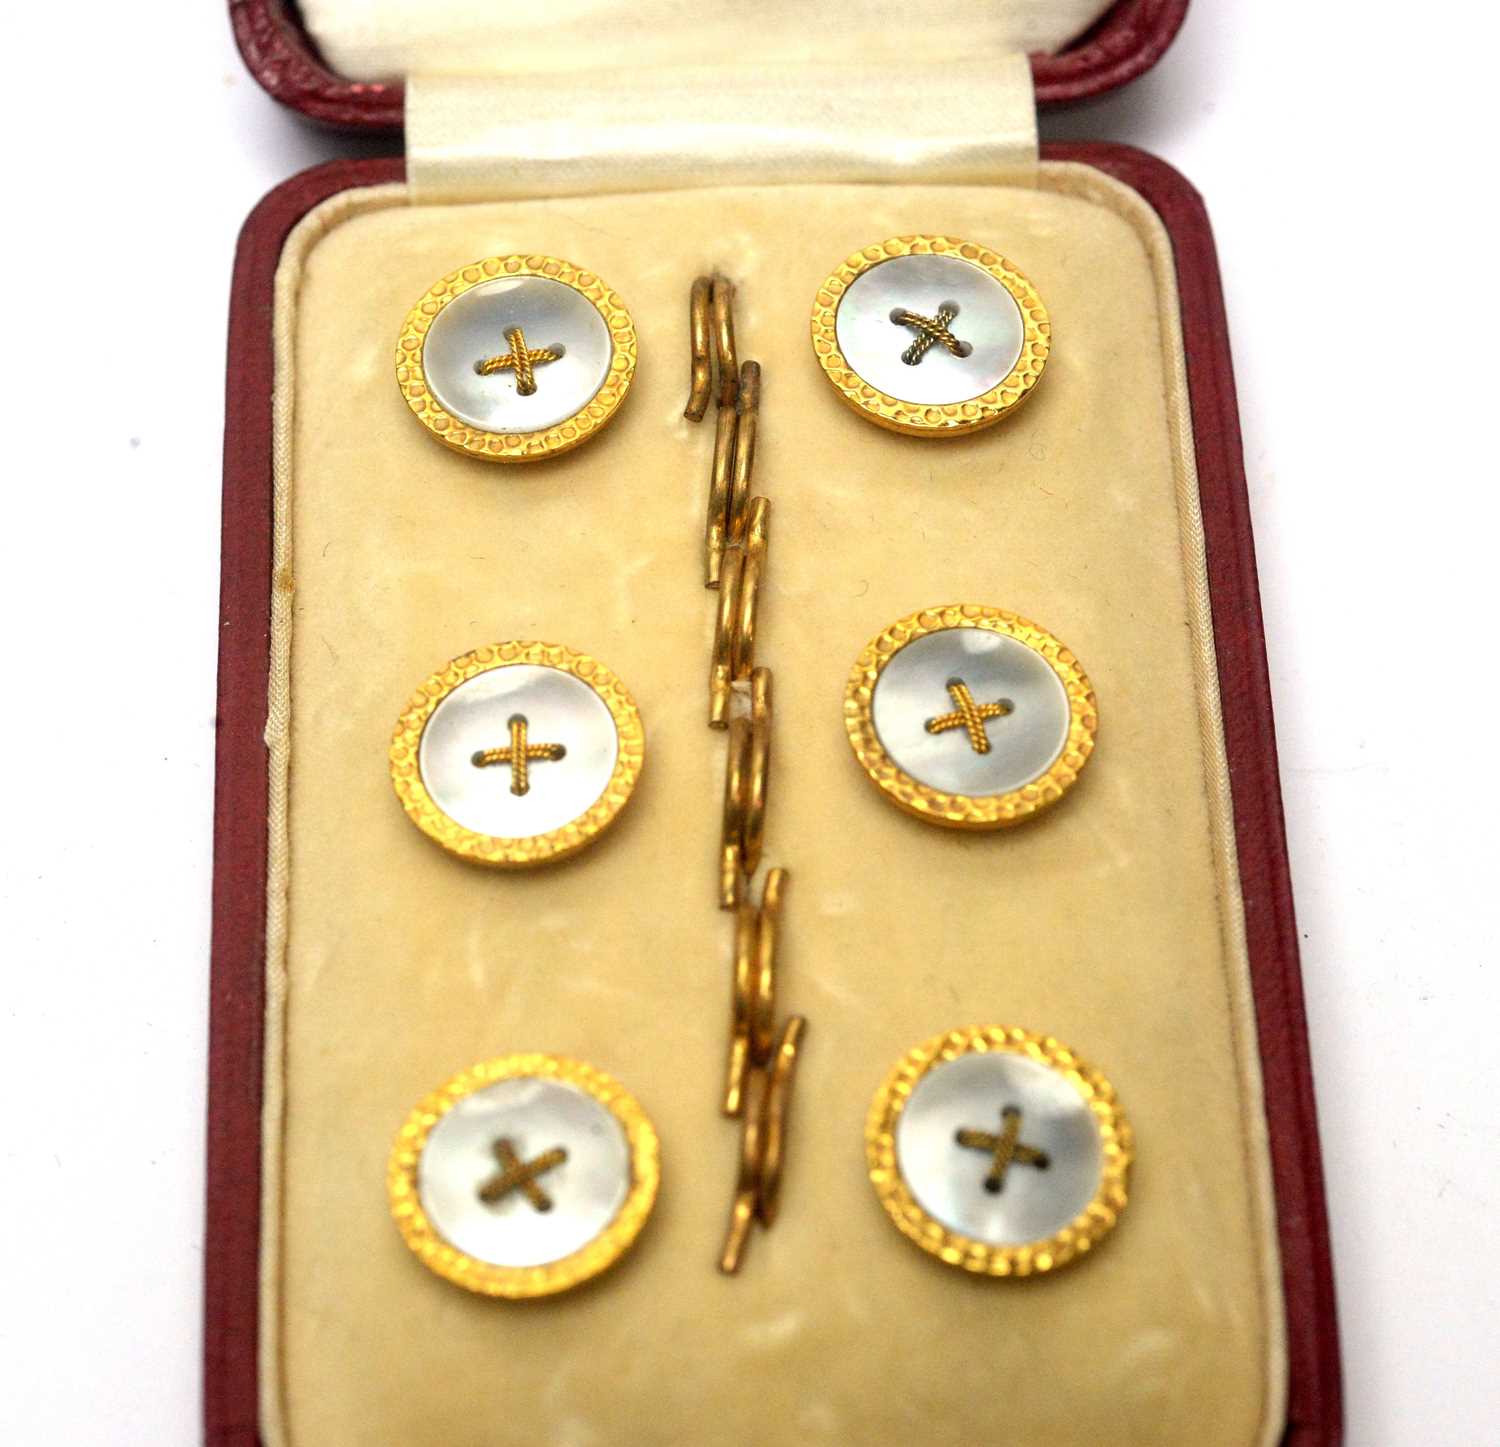 A 9ct yellow gold tie pin, and various shirt studs - Image 5 of 5